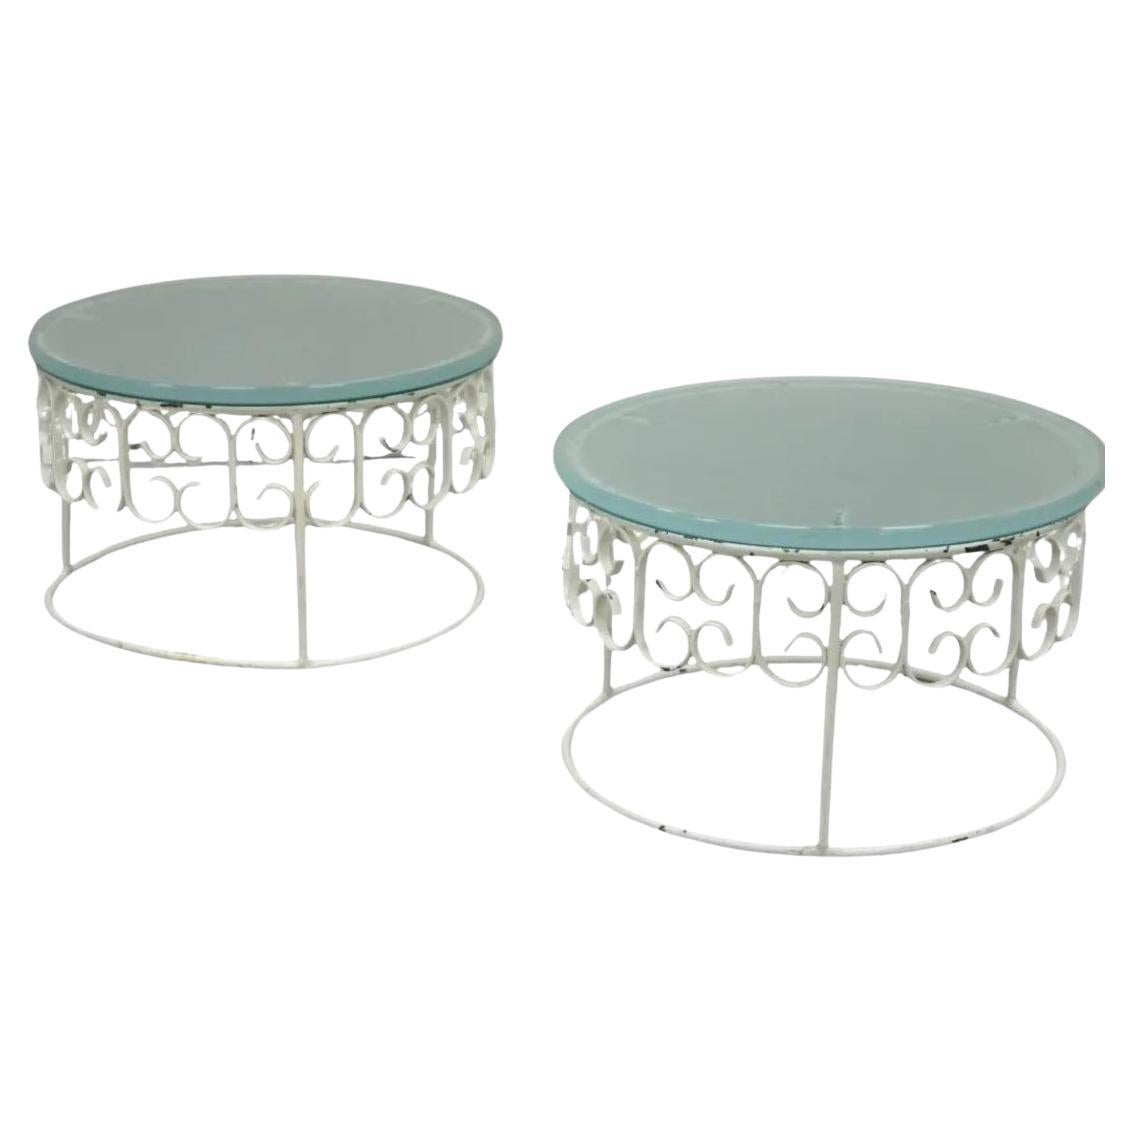 Arthur Umanoff Wrought Iron Scroll Low Round Glass Top Side Tables - a Pair For Sale